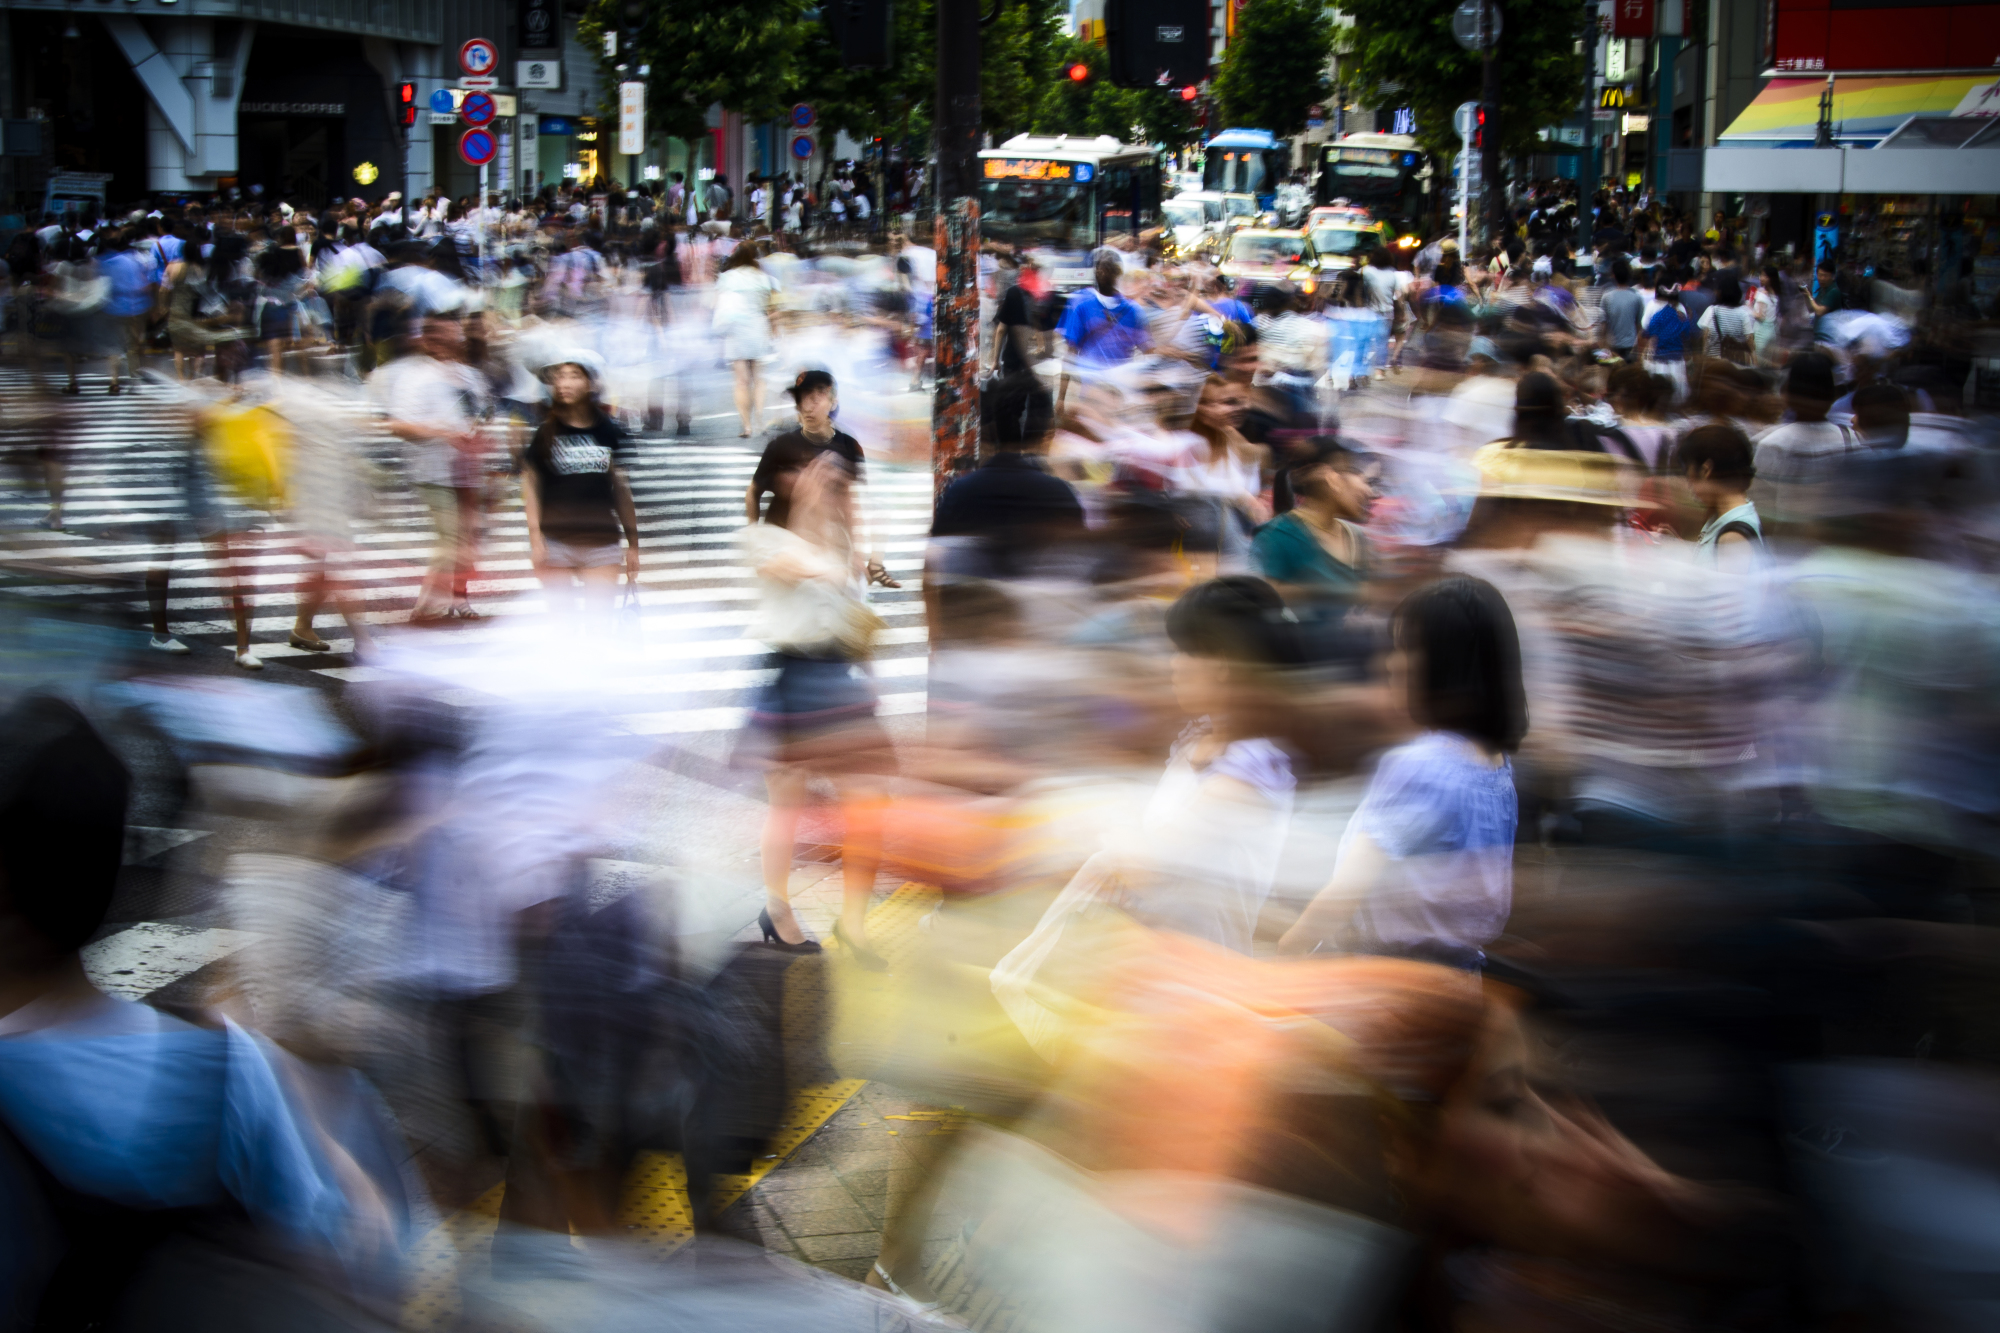 Pedestrians on a busy intersection in Tokyo | ISTOCK